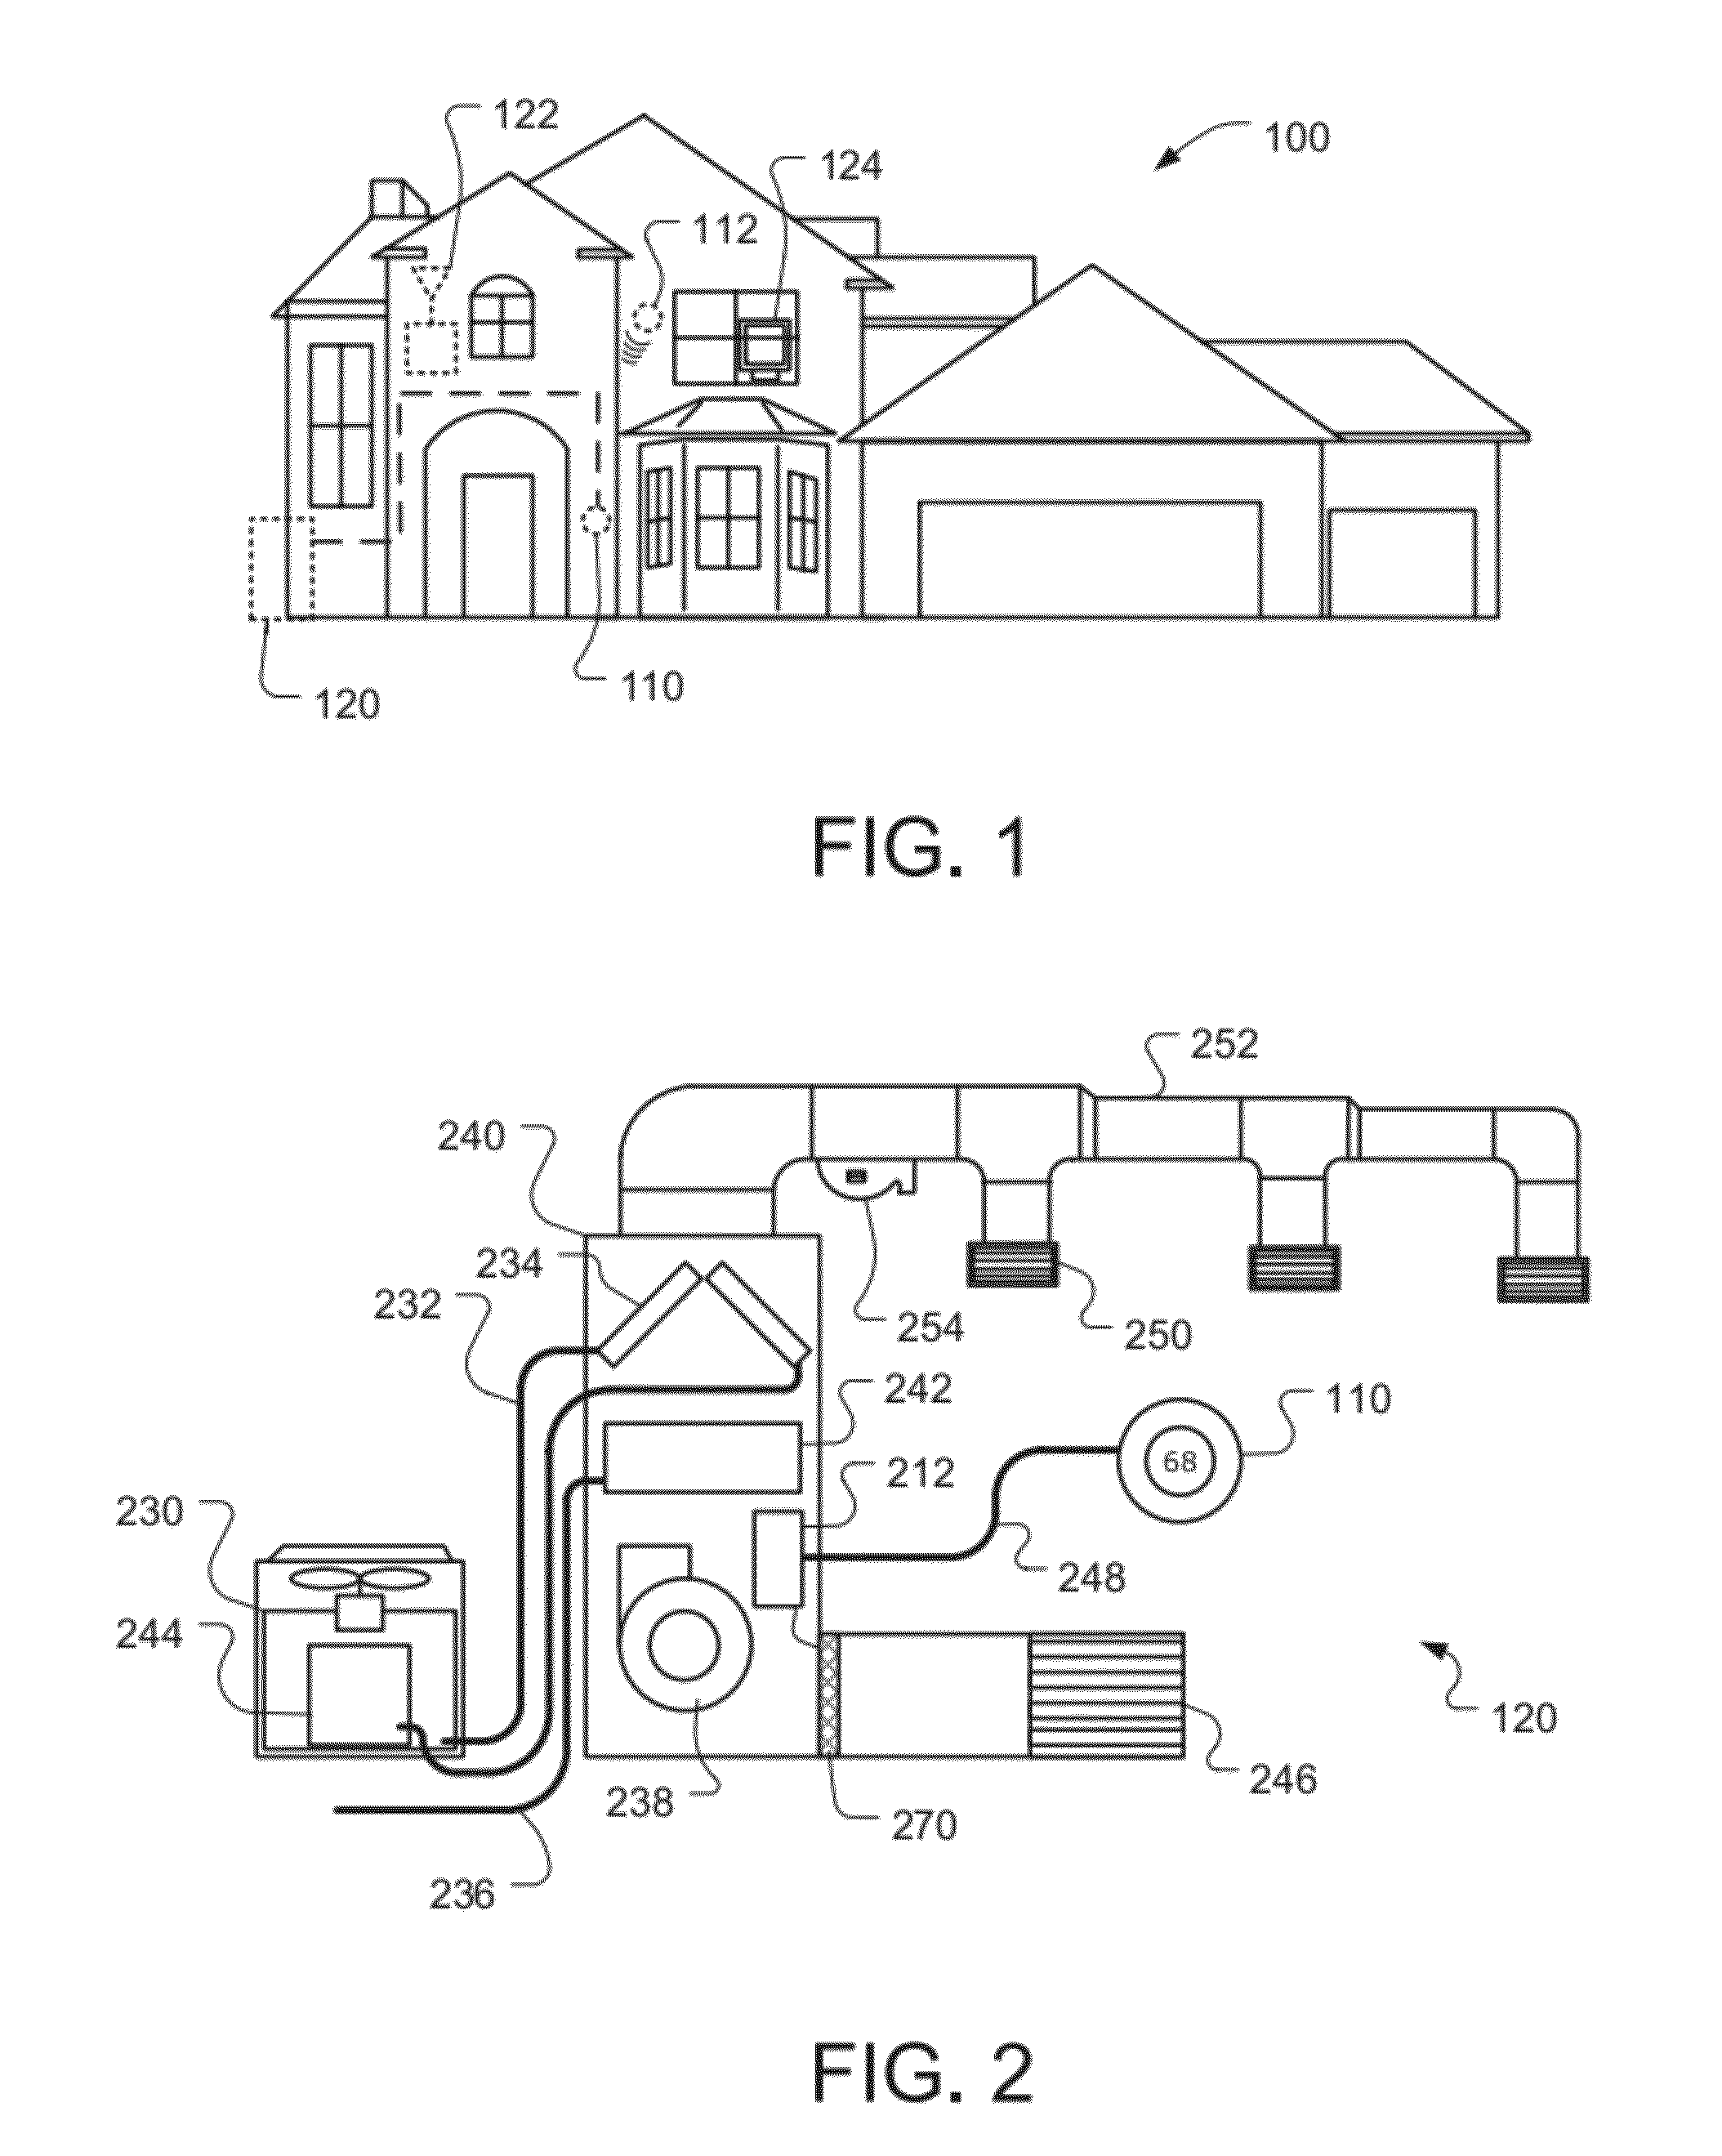 Thermostat with self-configuring connections to facilitate do-it-yourself installation